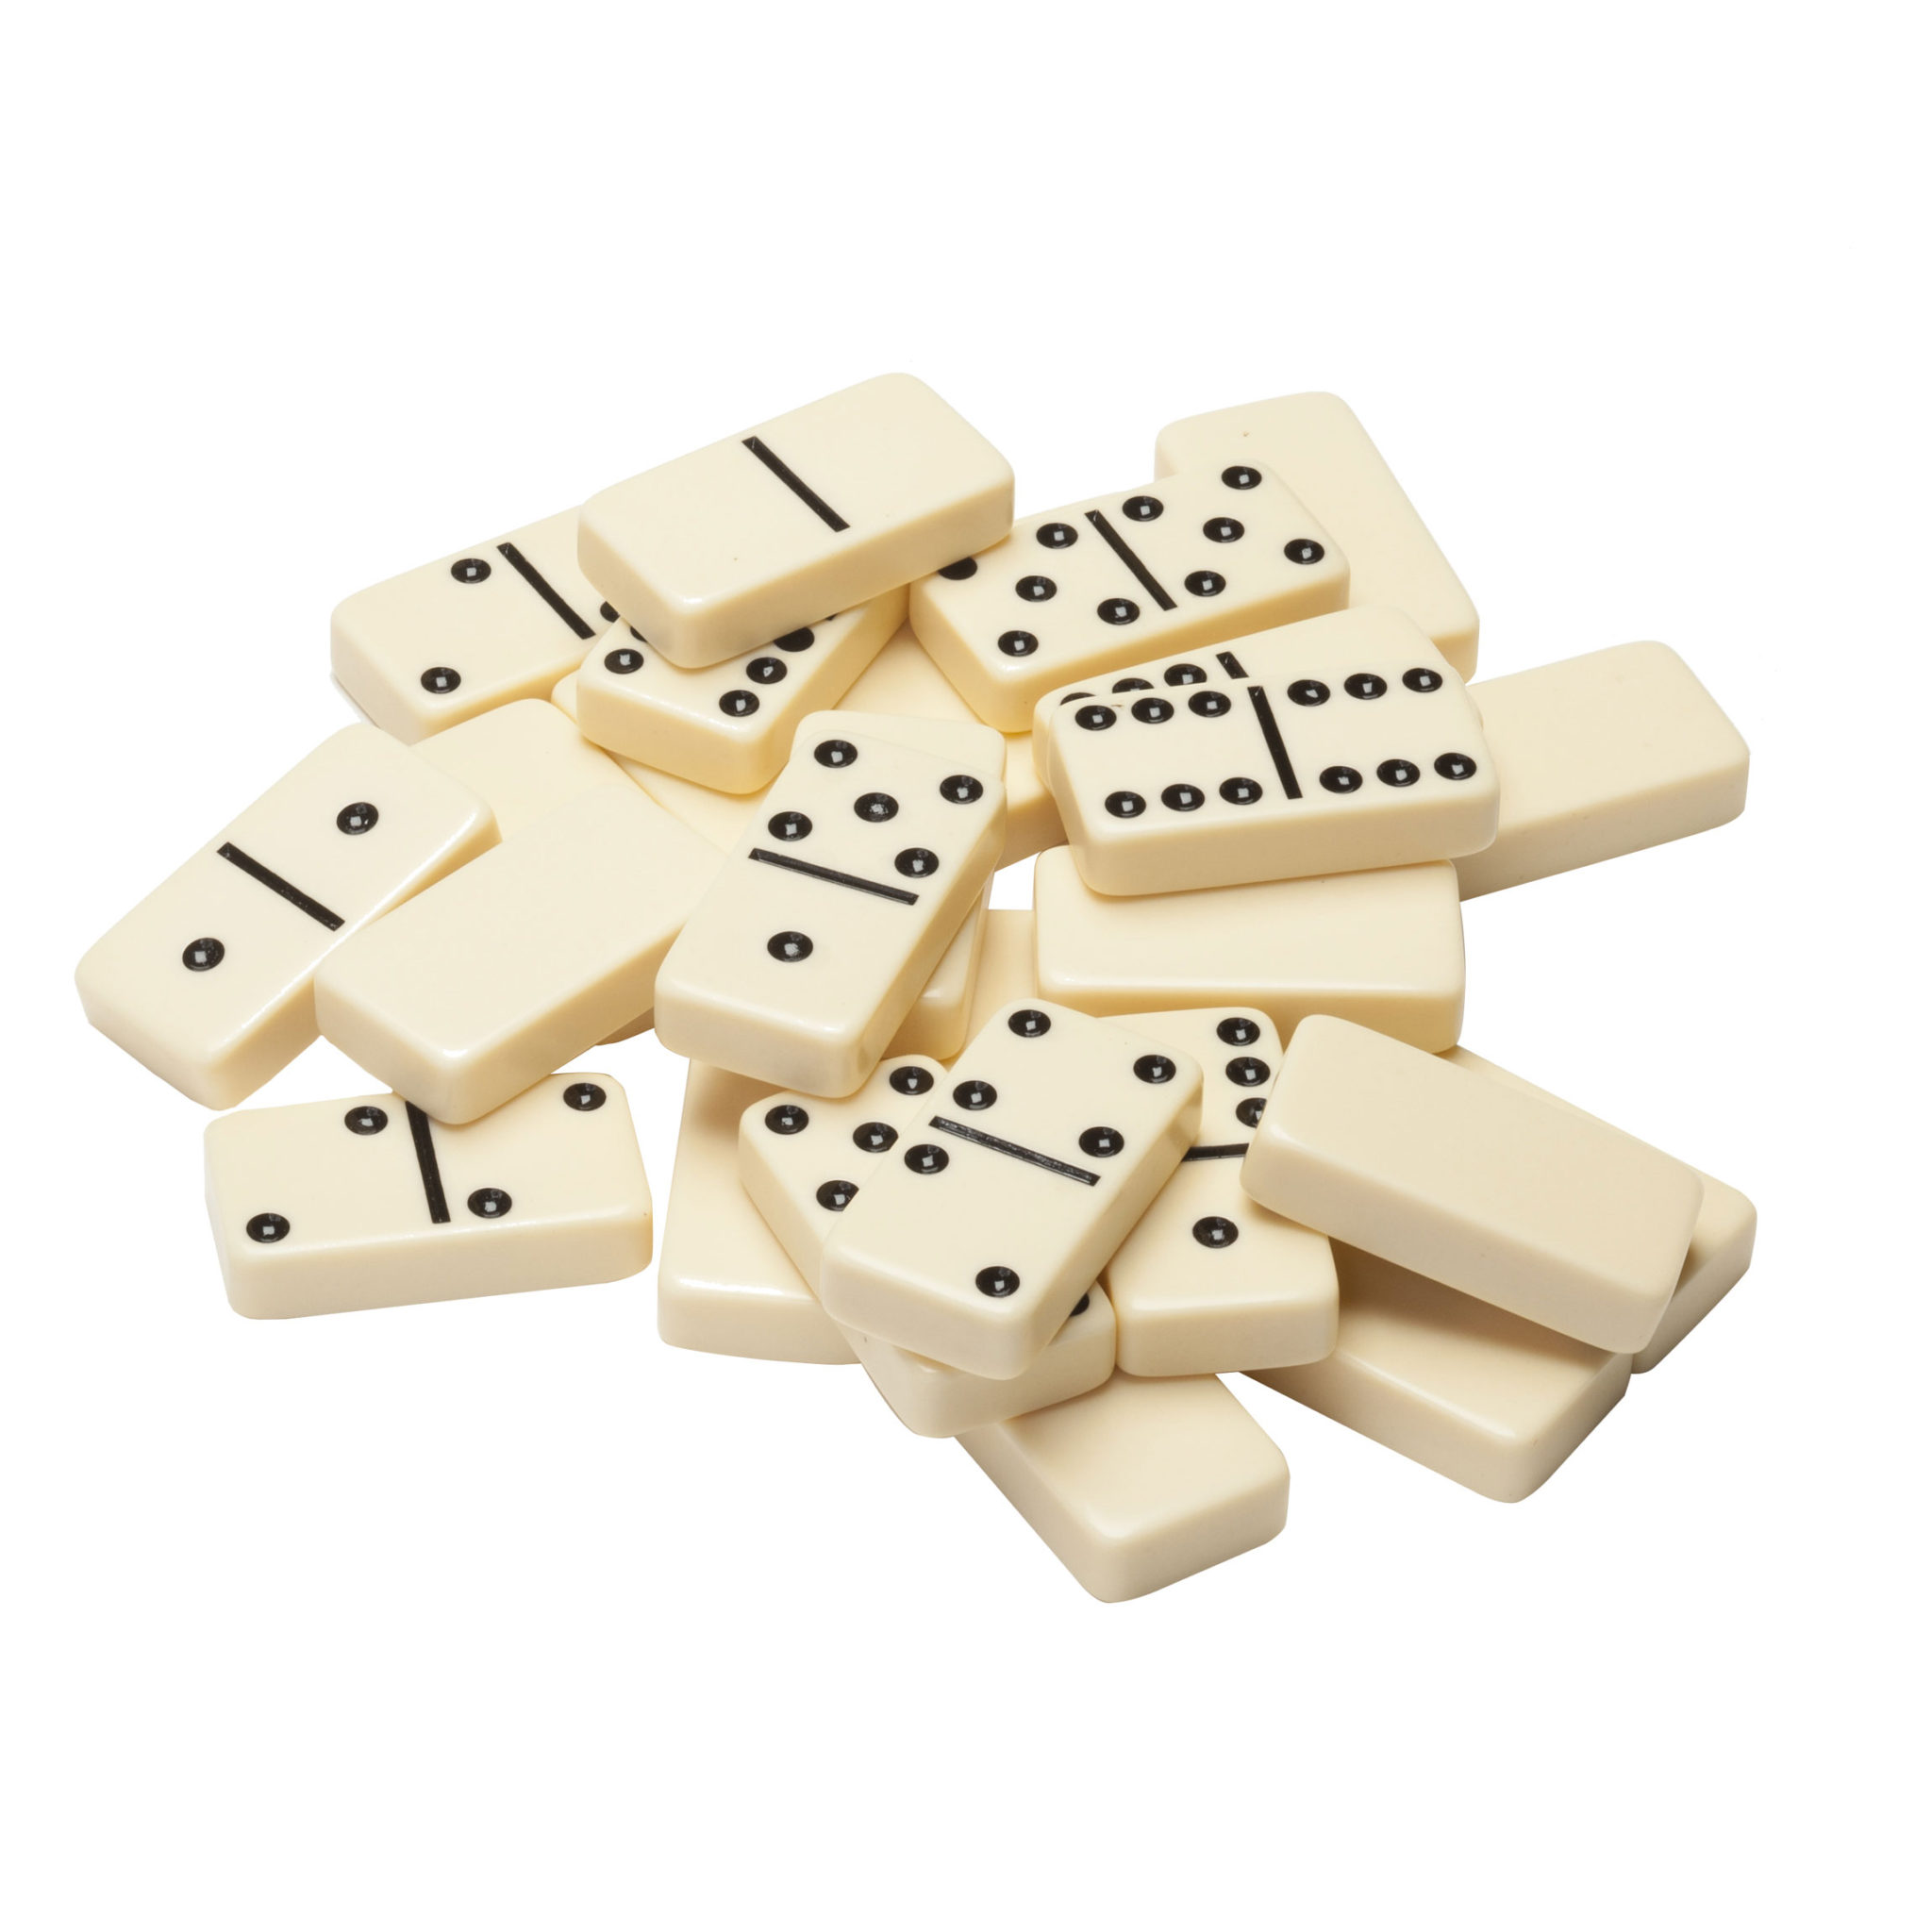 Double Six Dominoes – Ivory Tiles, Club Size – Wood Expressions